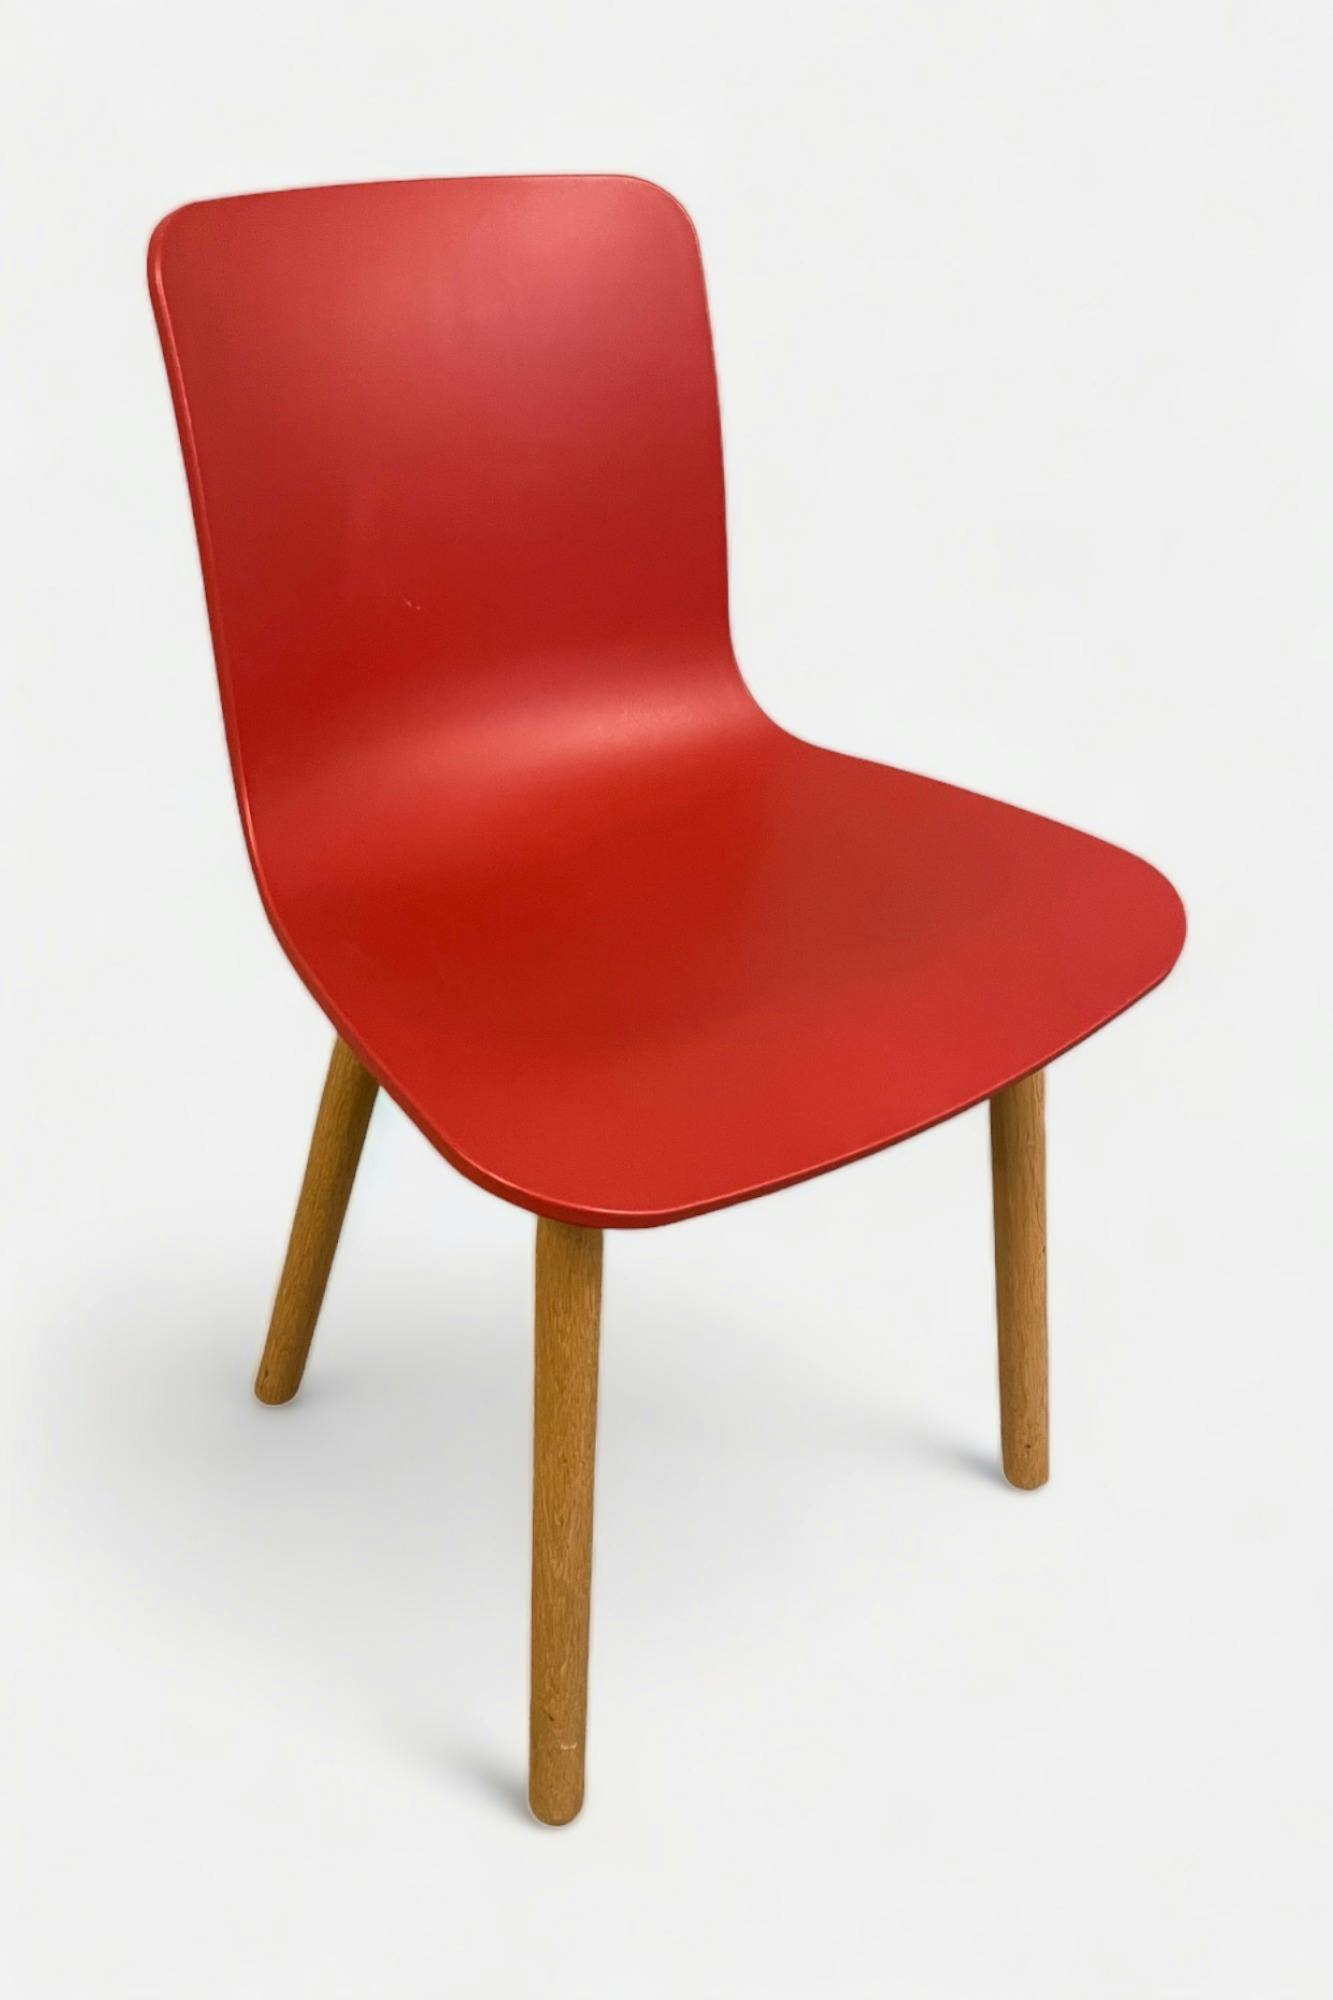 Vitra red / dark peach Nordic Style Chair on wood legs - Relieve Furniture